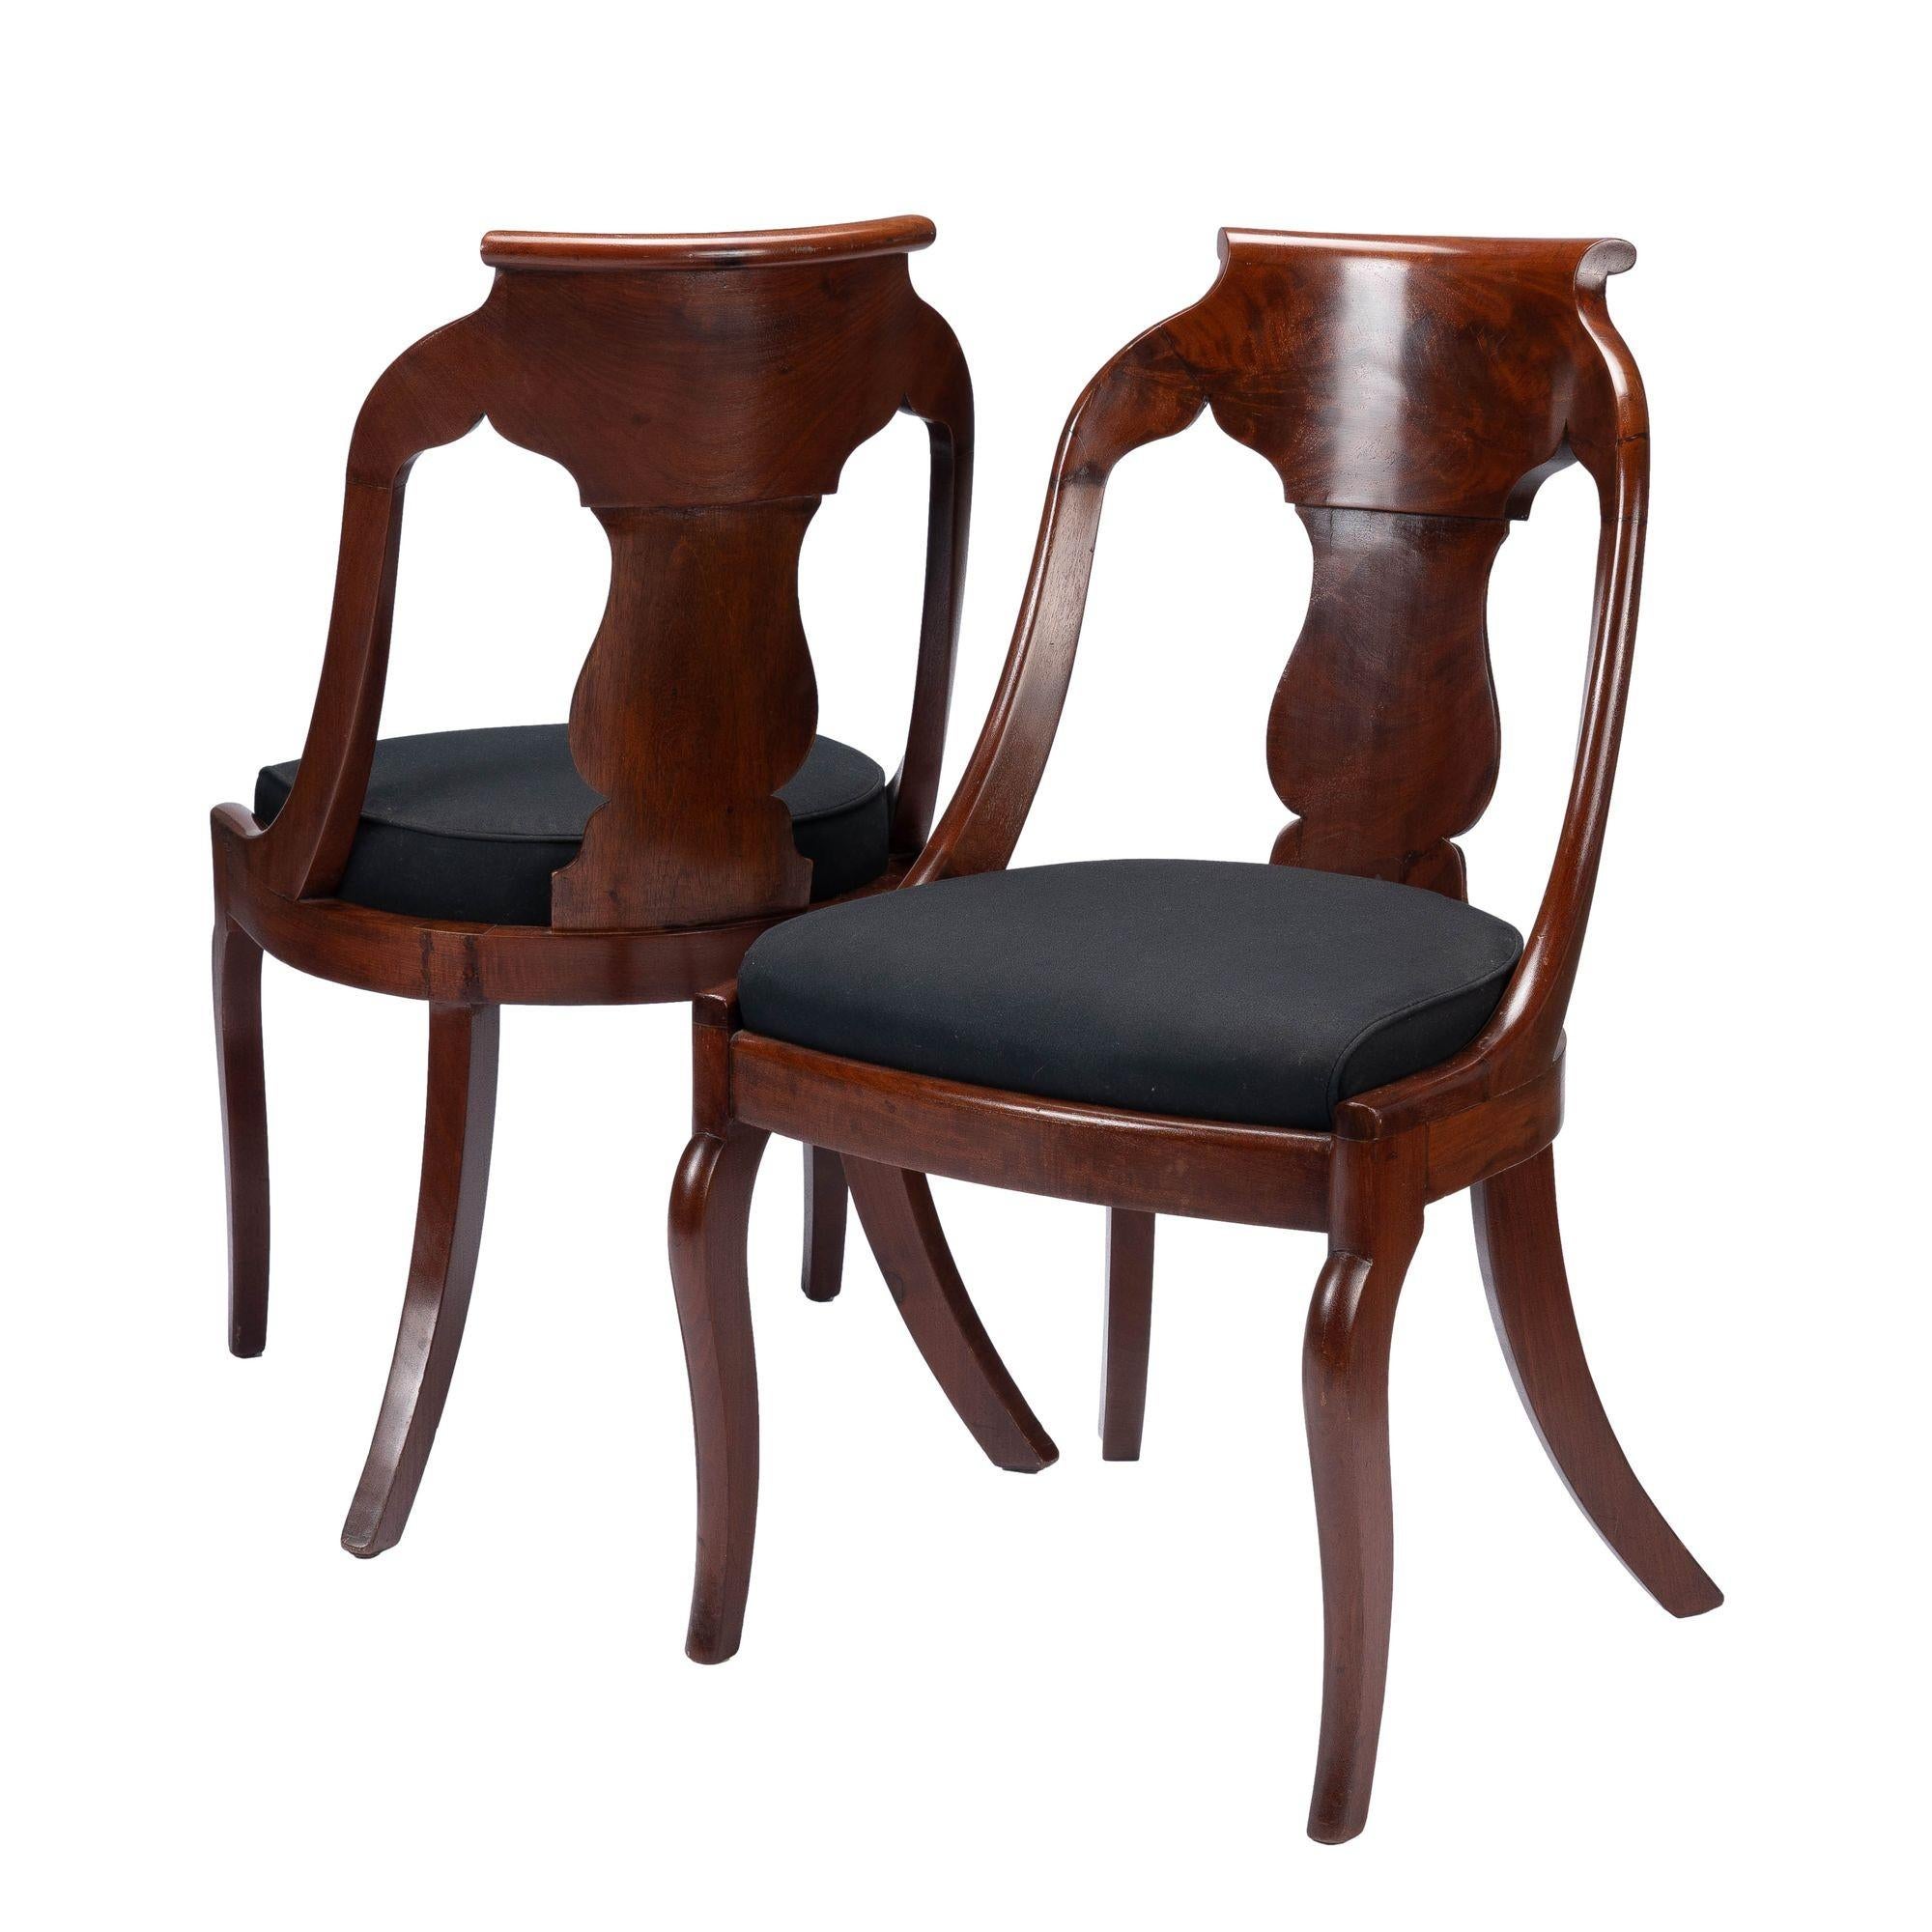 Pair of American neoclassic mahogany and figured mahogany veneered slip seat gondola chairs in the French Restoration taste. The boxed slip seat is fitted to a bowed mahogany front seat frame on pseudo sabre front legs and dramatically raked rear